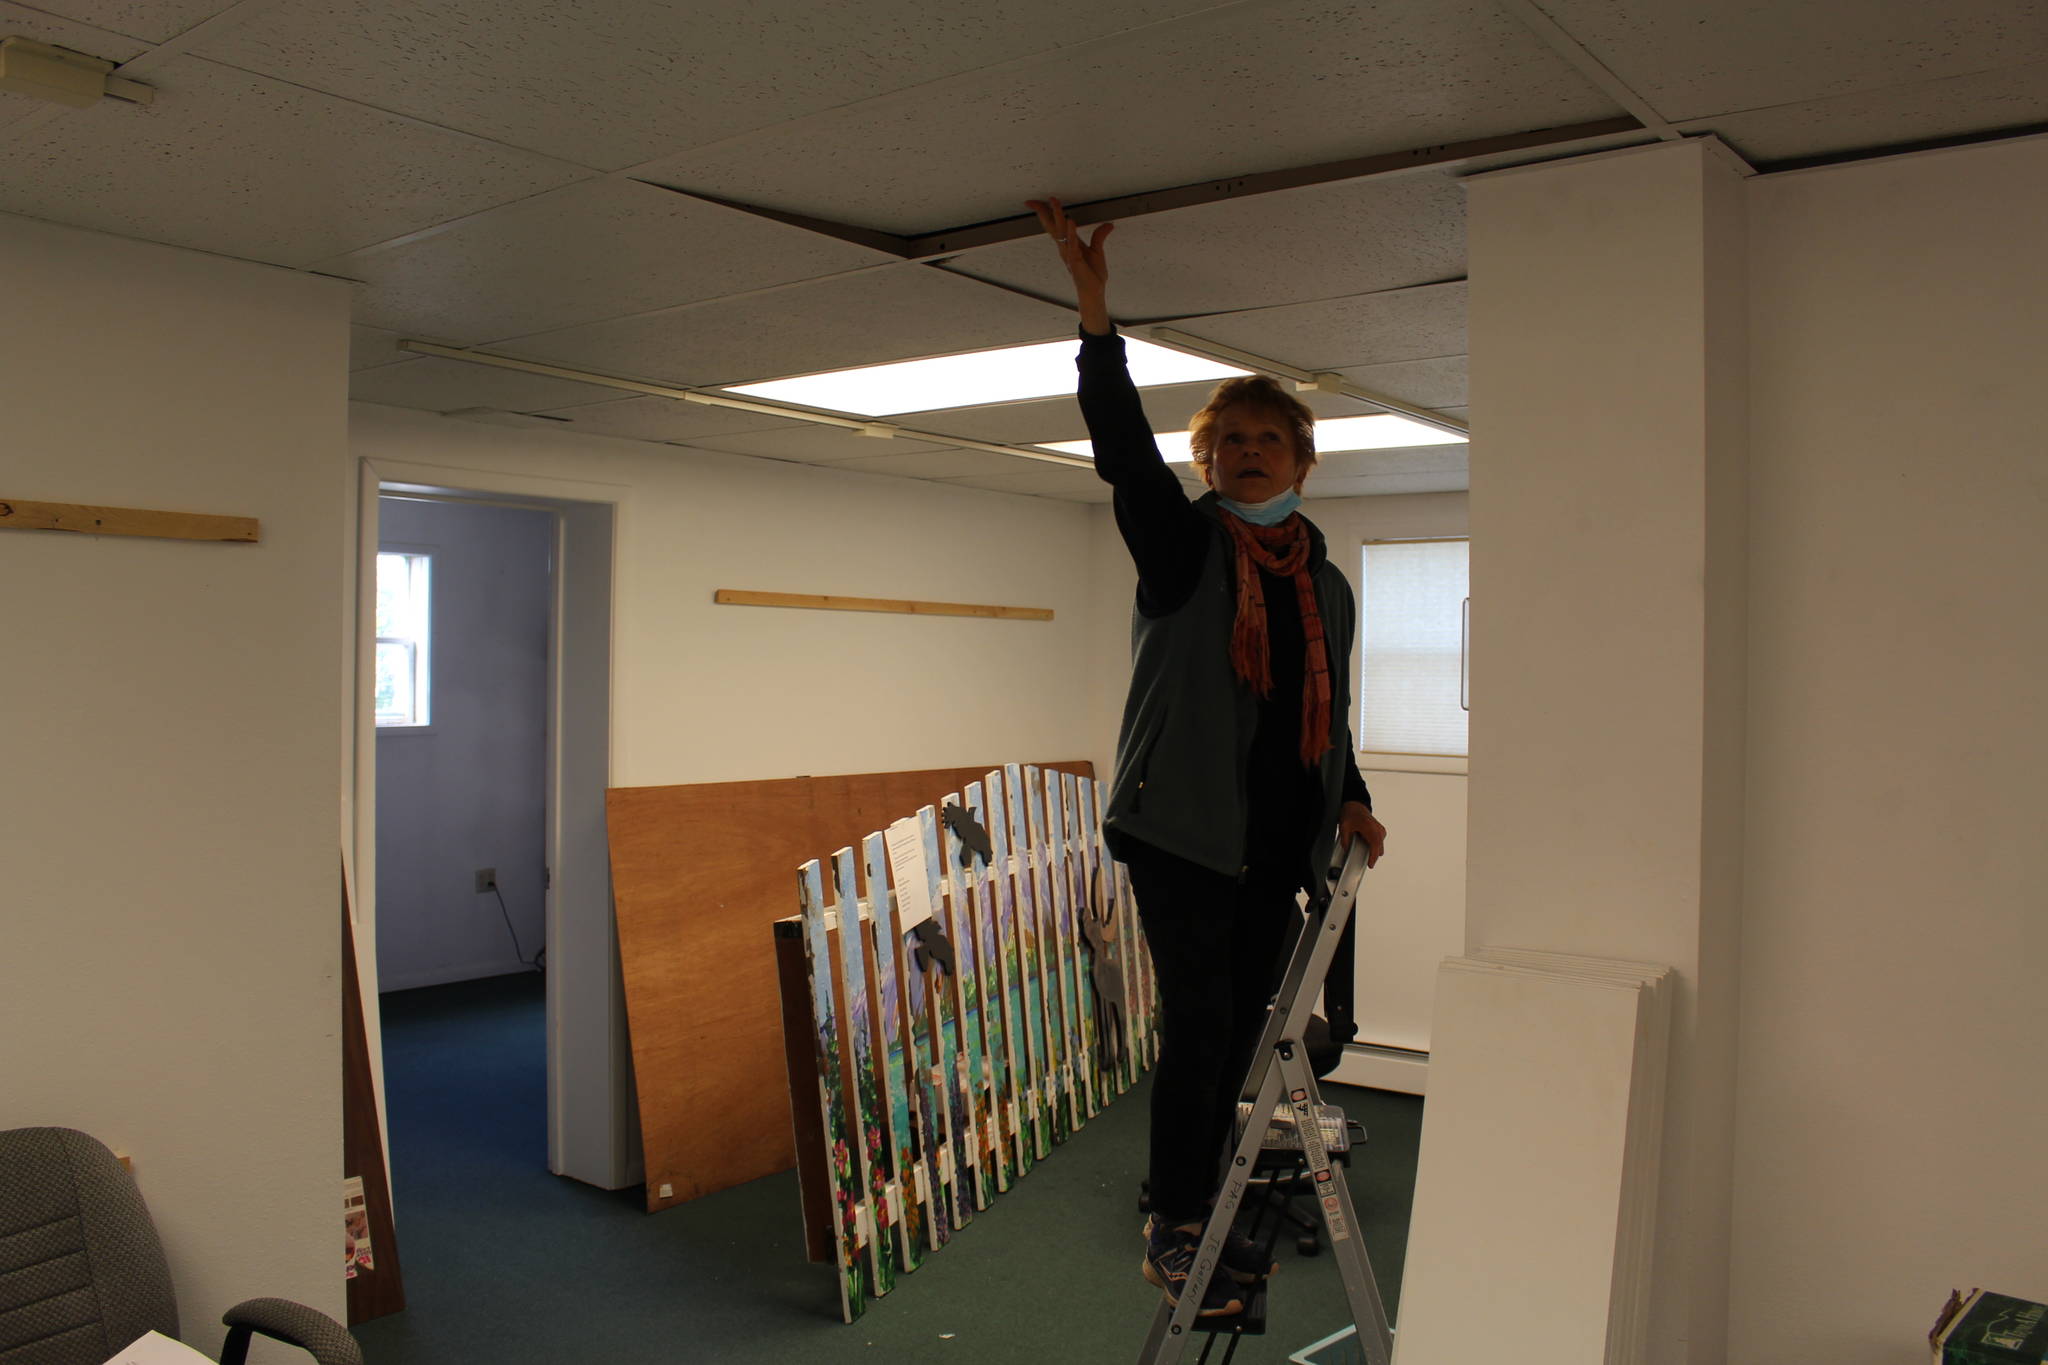 Marion Nelson, vice president of the Peninsula Art Guild, explains some of the renovations that will be taking place at the Kenai Fine Art Center on Sept. 1, 2020 in Kenai, Alaska. (Photo by Brian Mazurek/Peninsula Clarion)